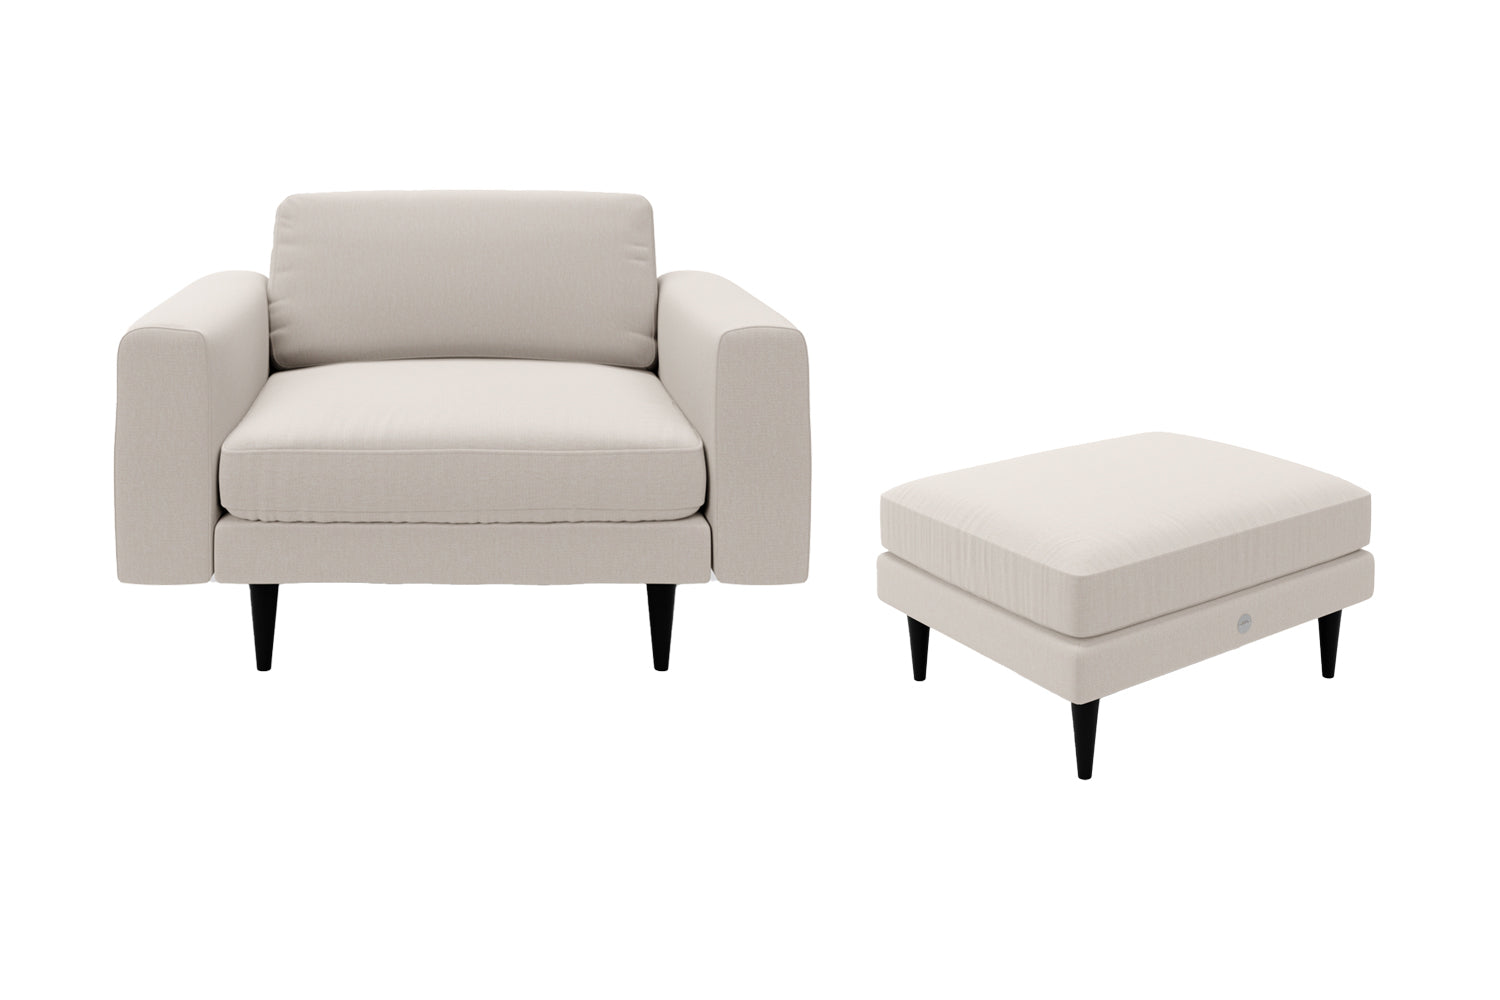 The Big Chill - 1.5 Seater Snuggler and Footstool Set - Biscuit